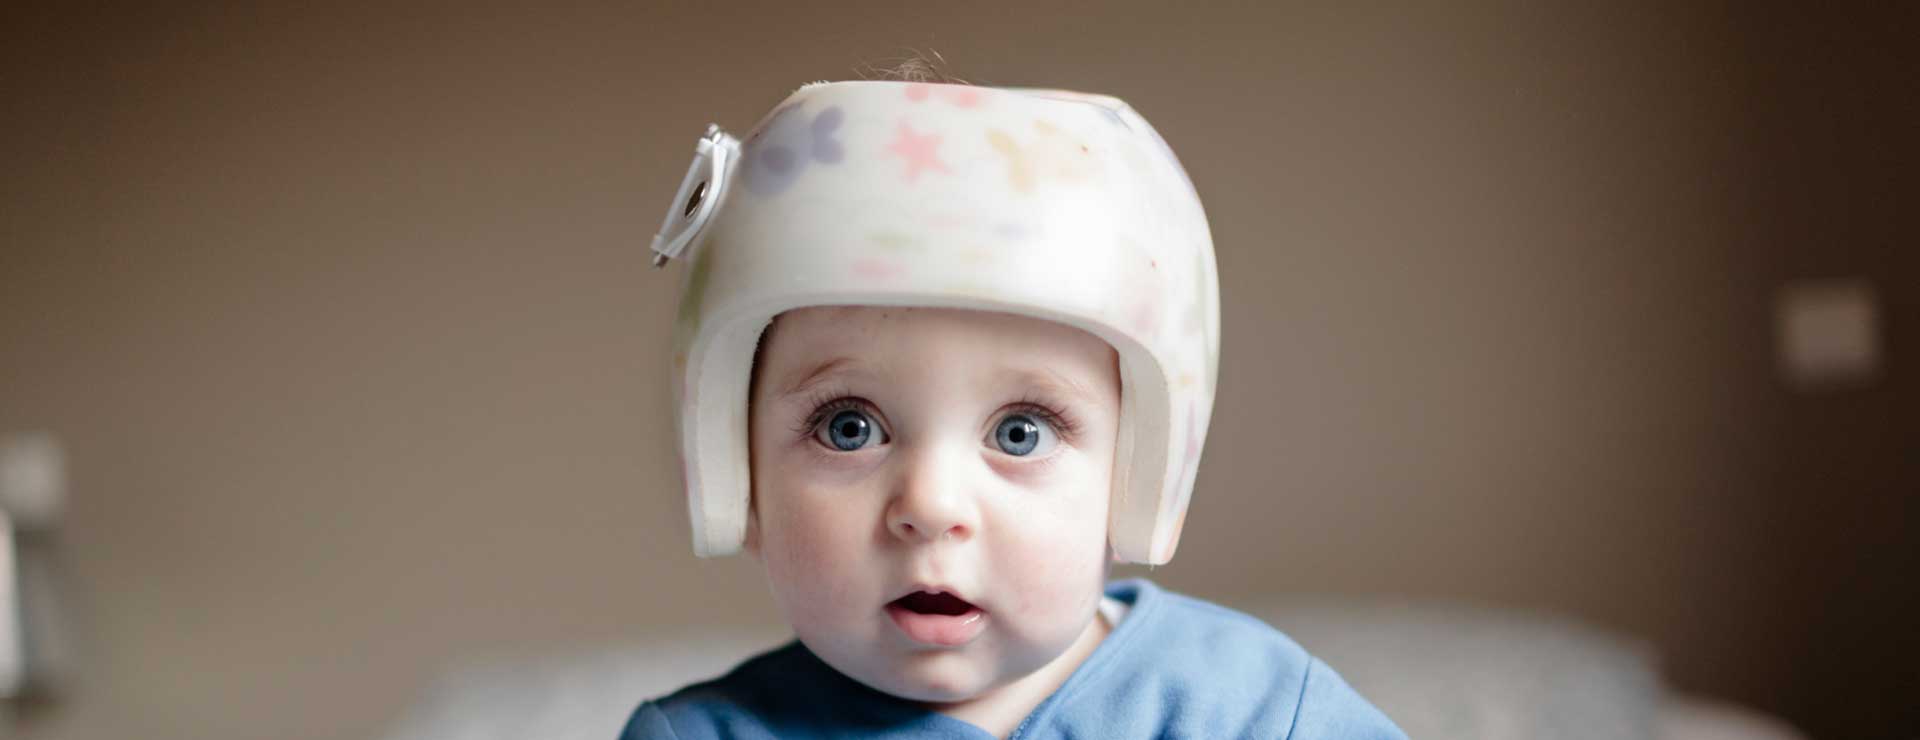 Helmet Therapy For Your Baby Johns Hopkins Medicine